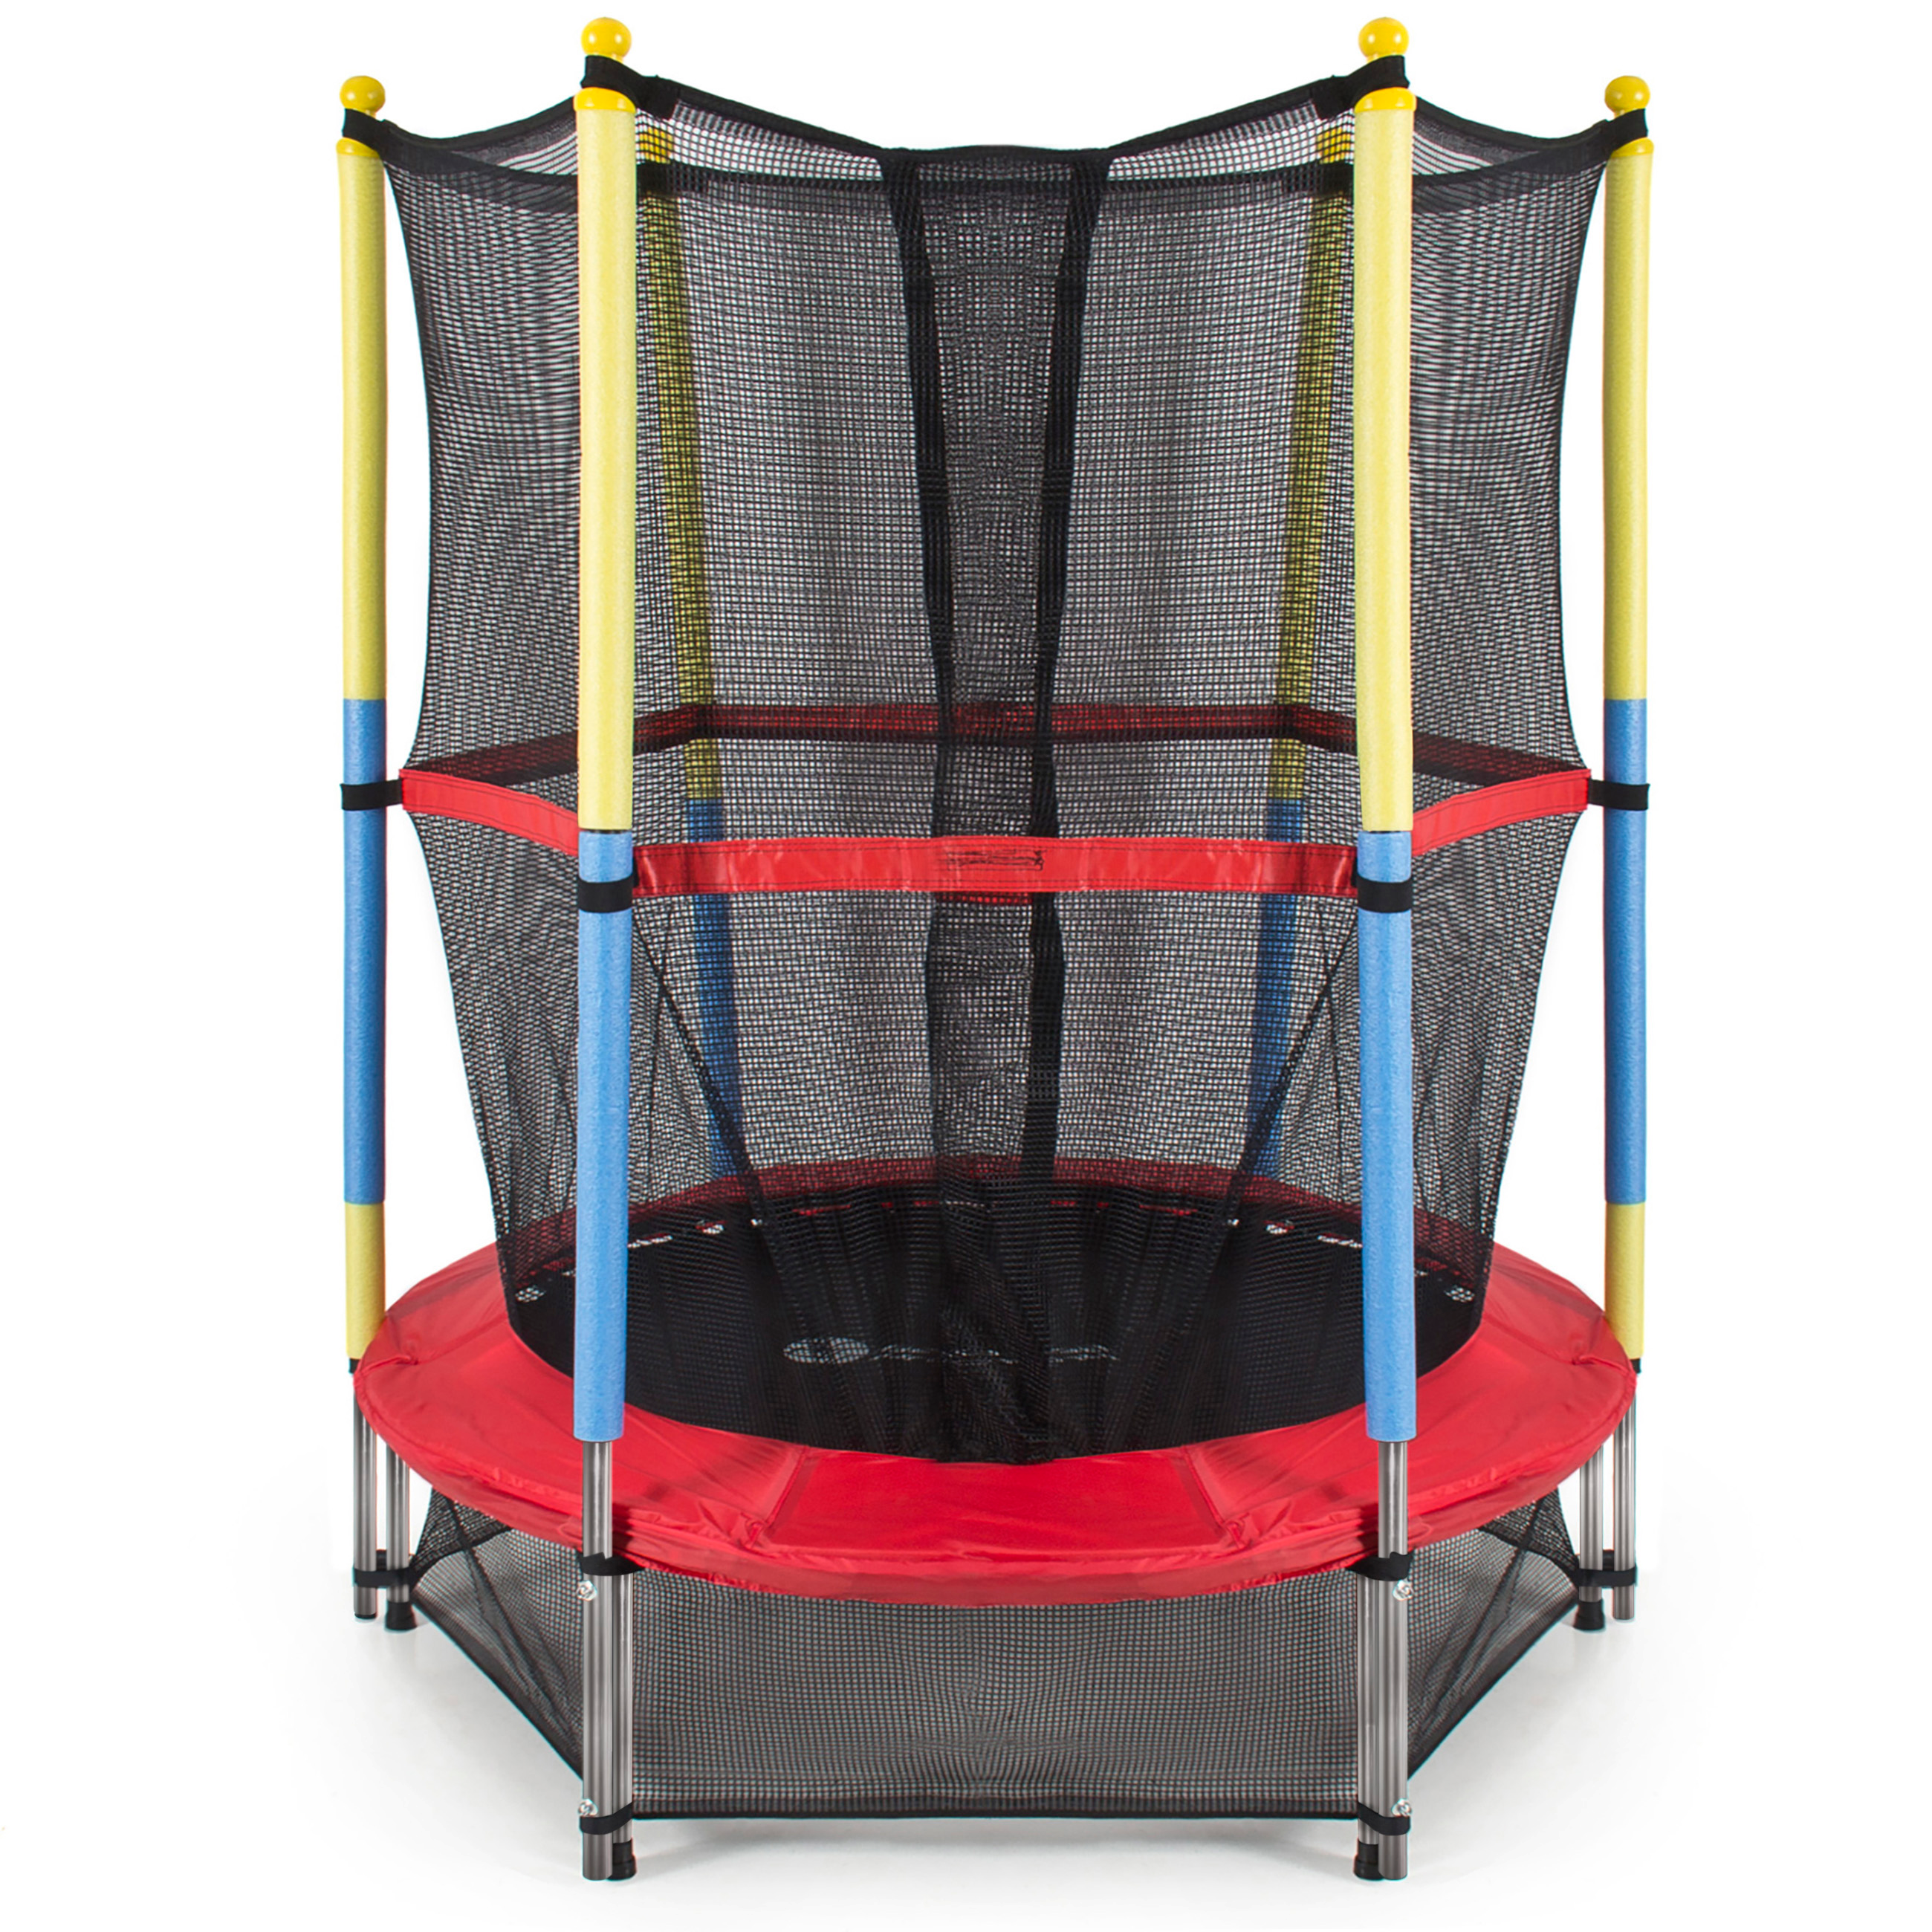 55″ Round Kids Mini Trampoline with Enclosure Only $69.95! (Reg $159.95)